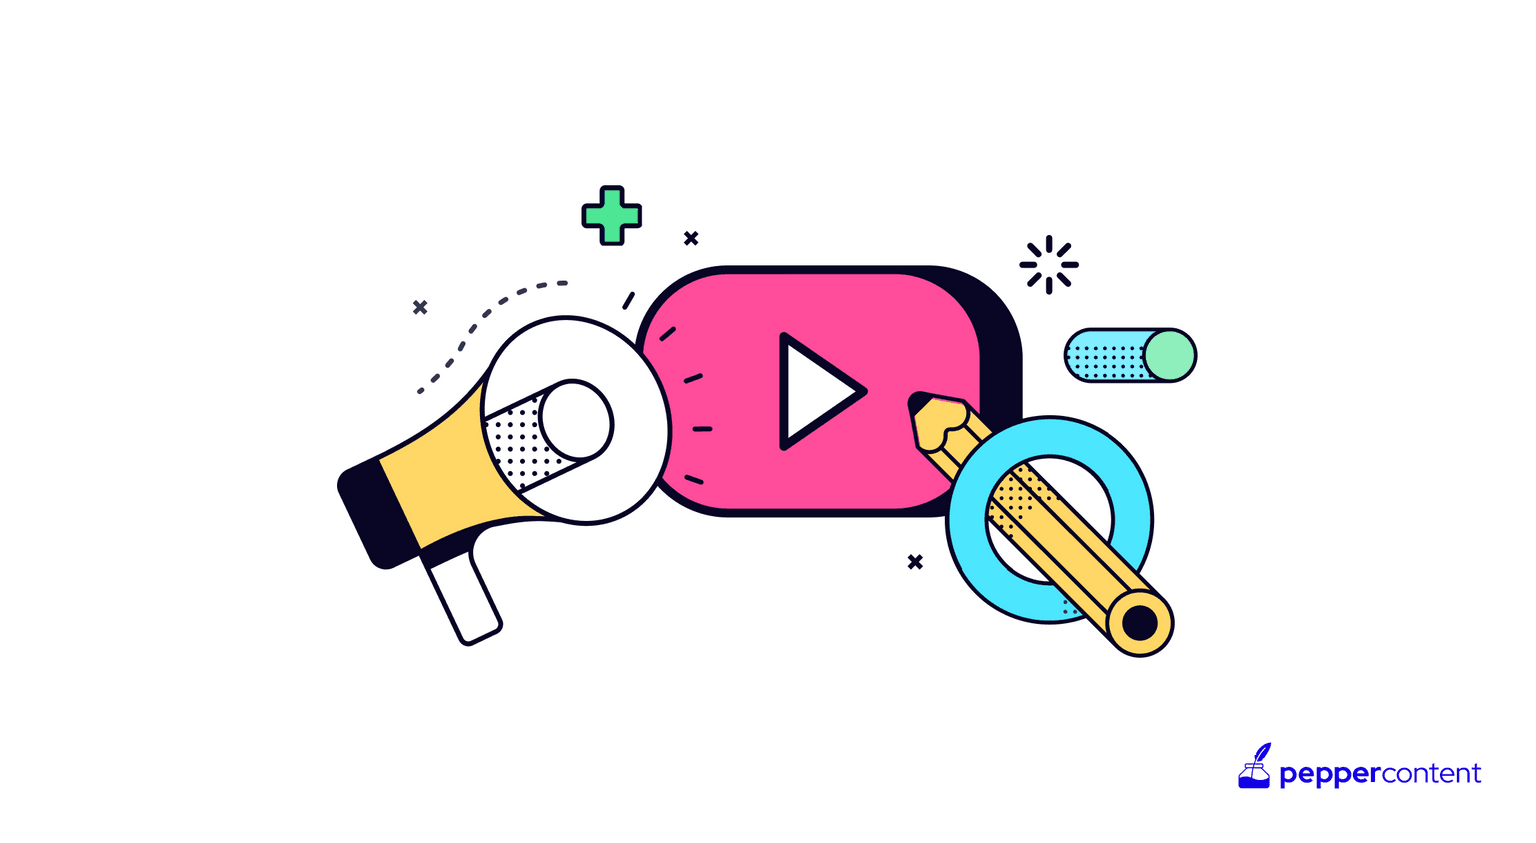 Personalized Video Marketing: The Future of Tailored Content